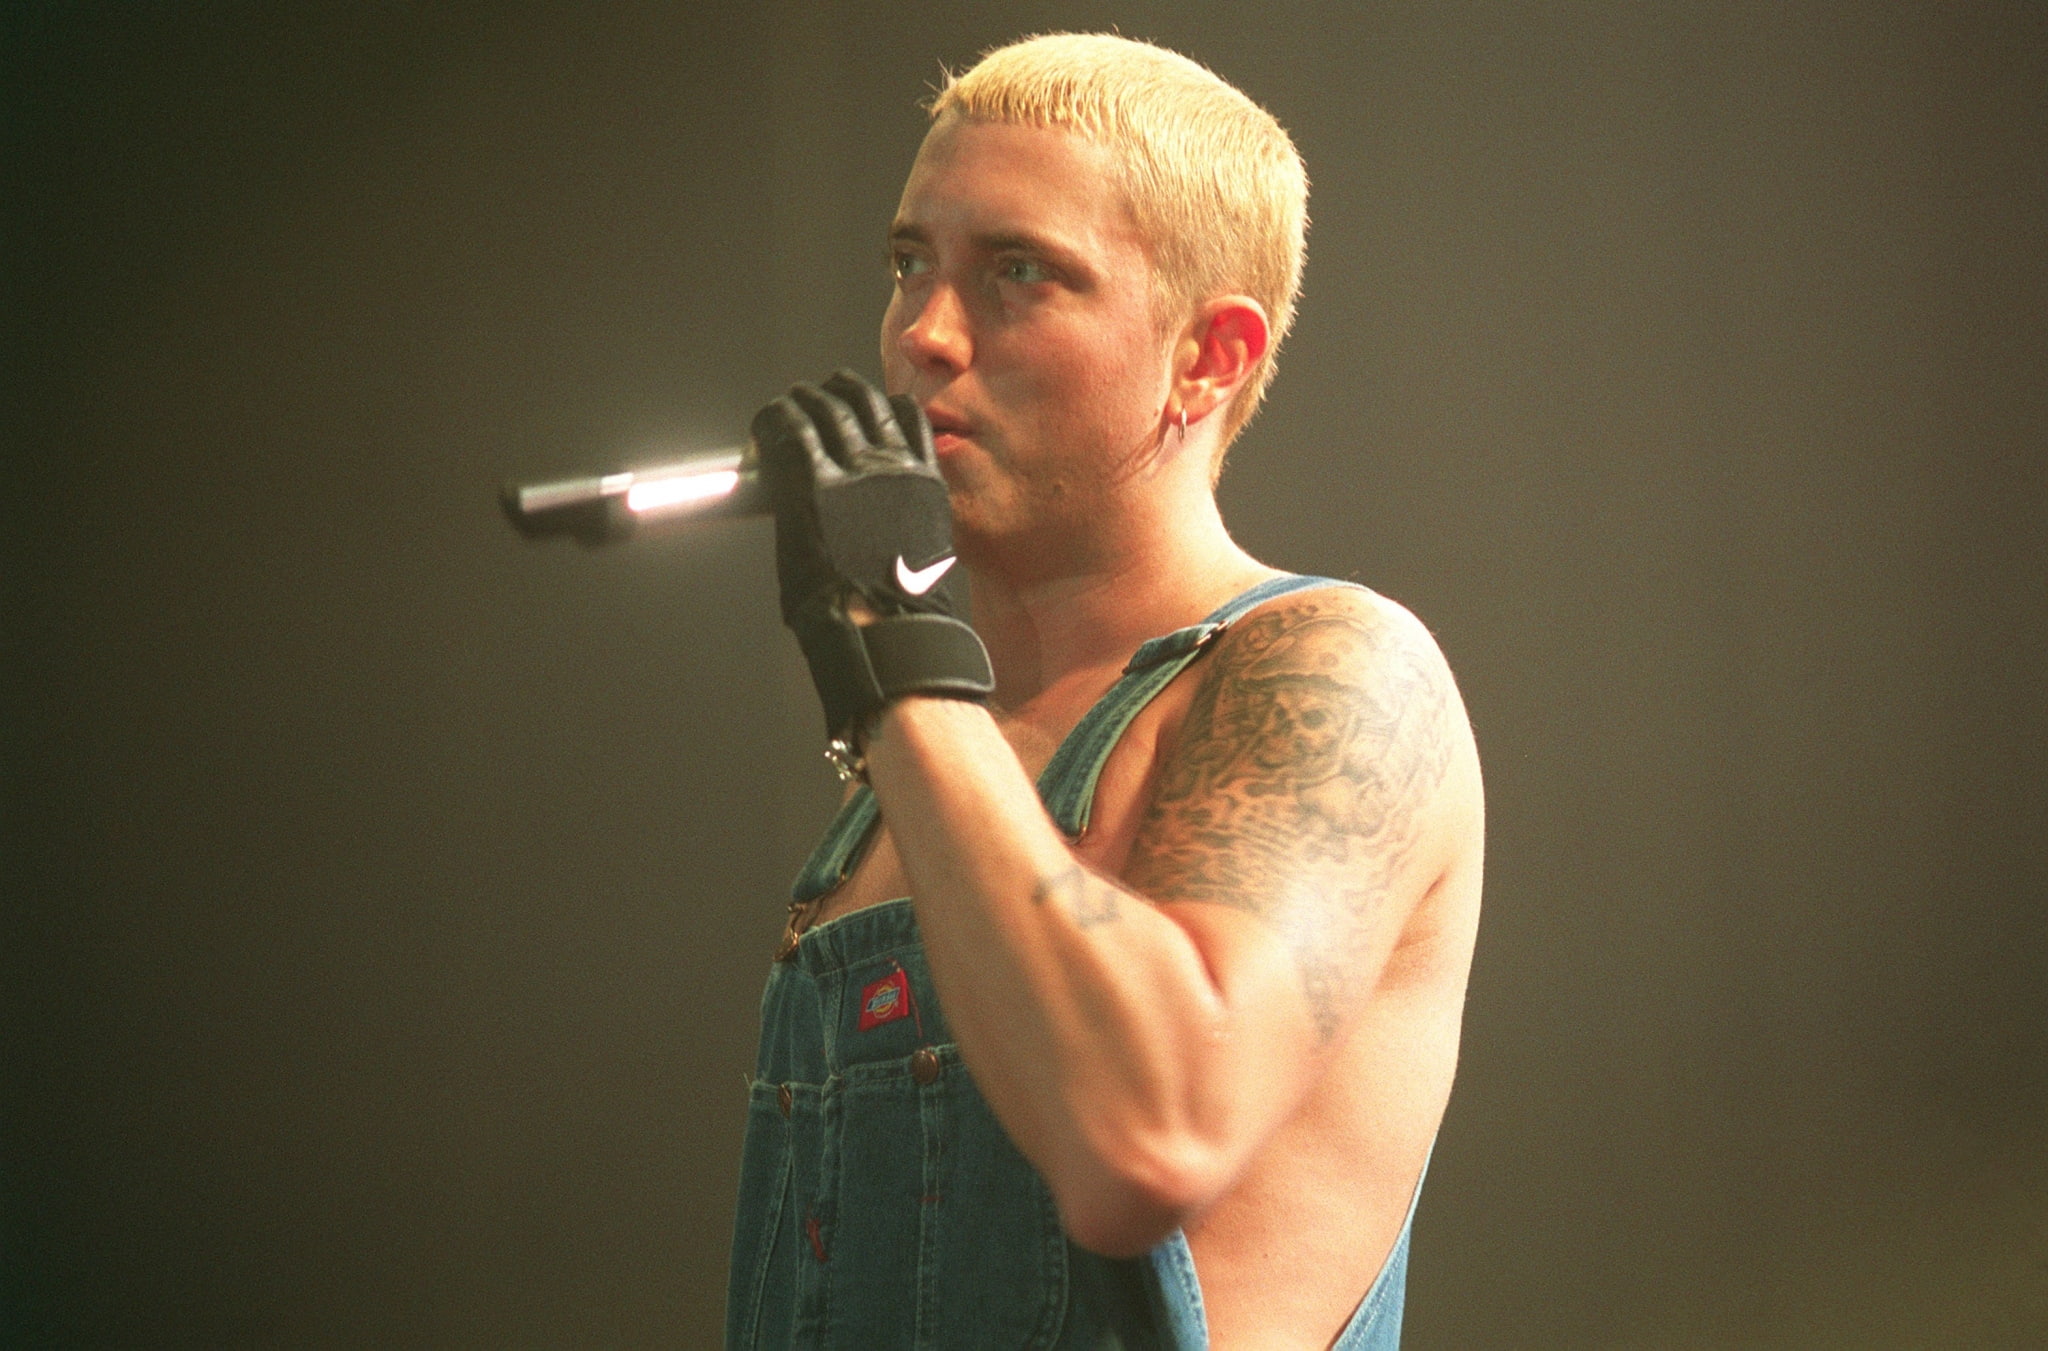 eminem pictures desktop, one person, microphone, input device